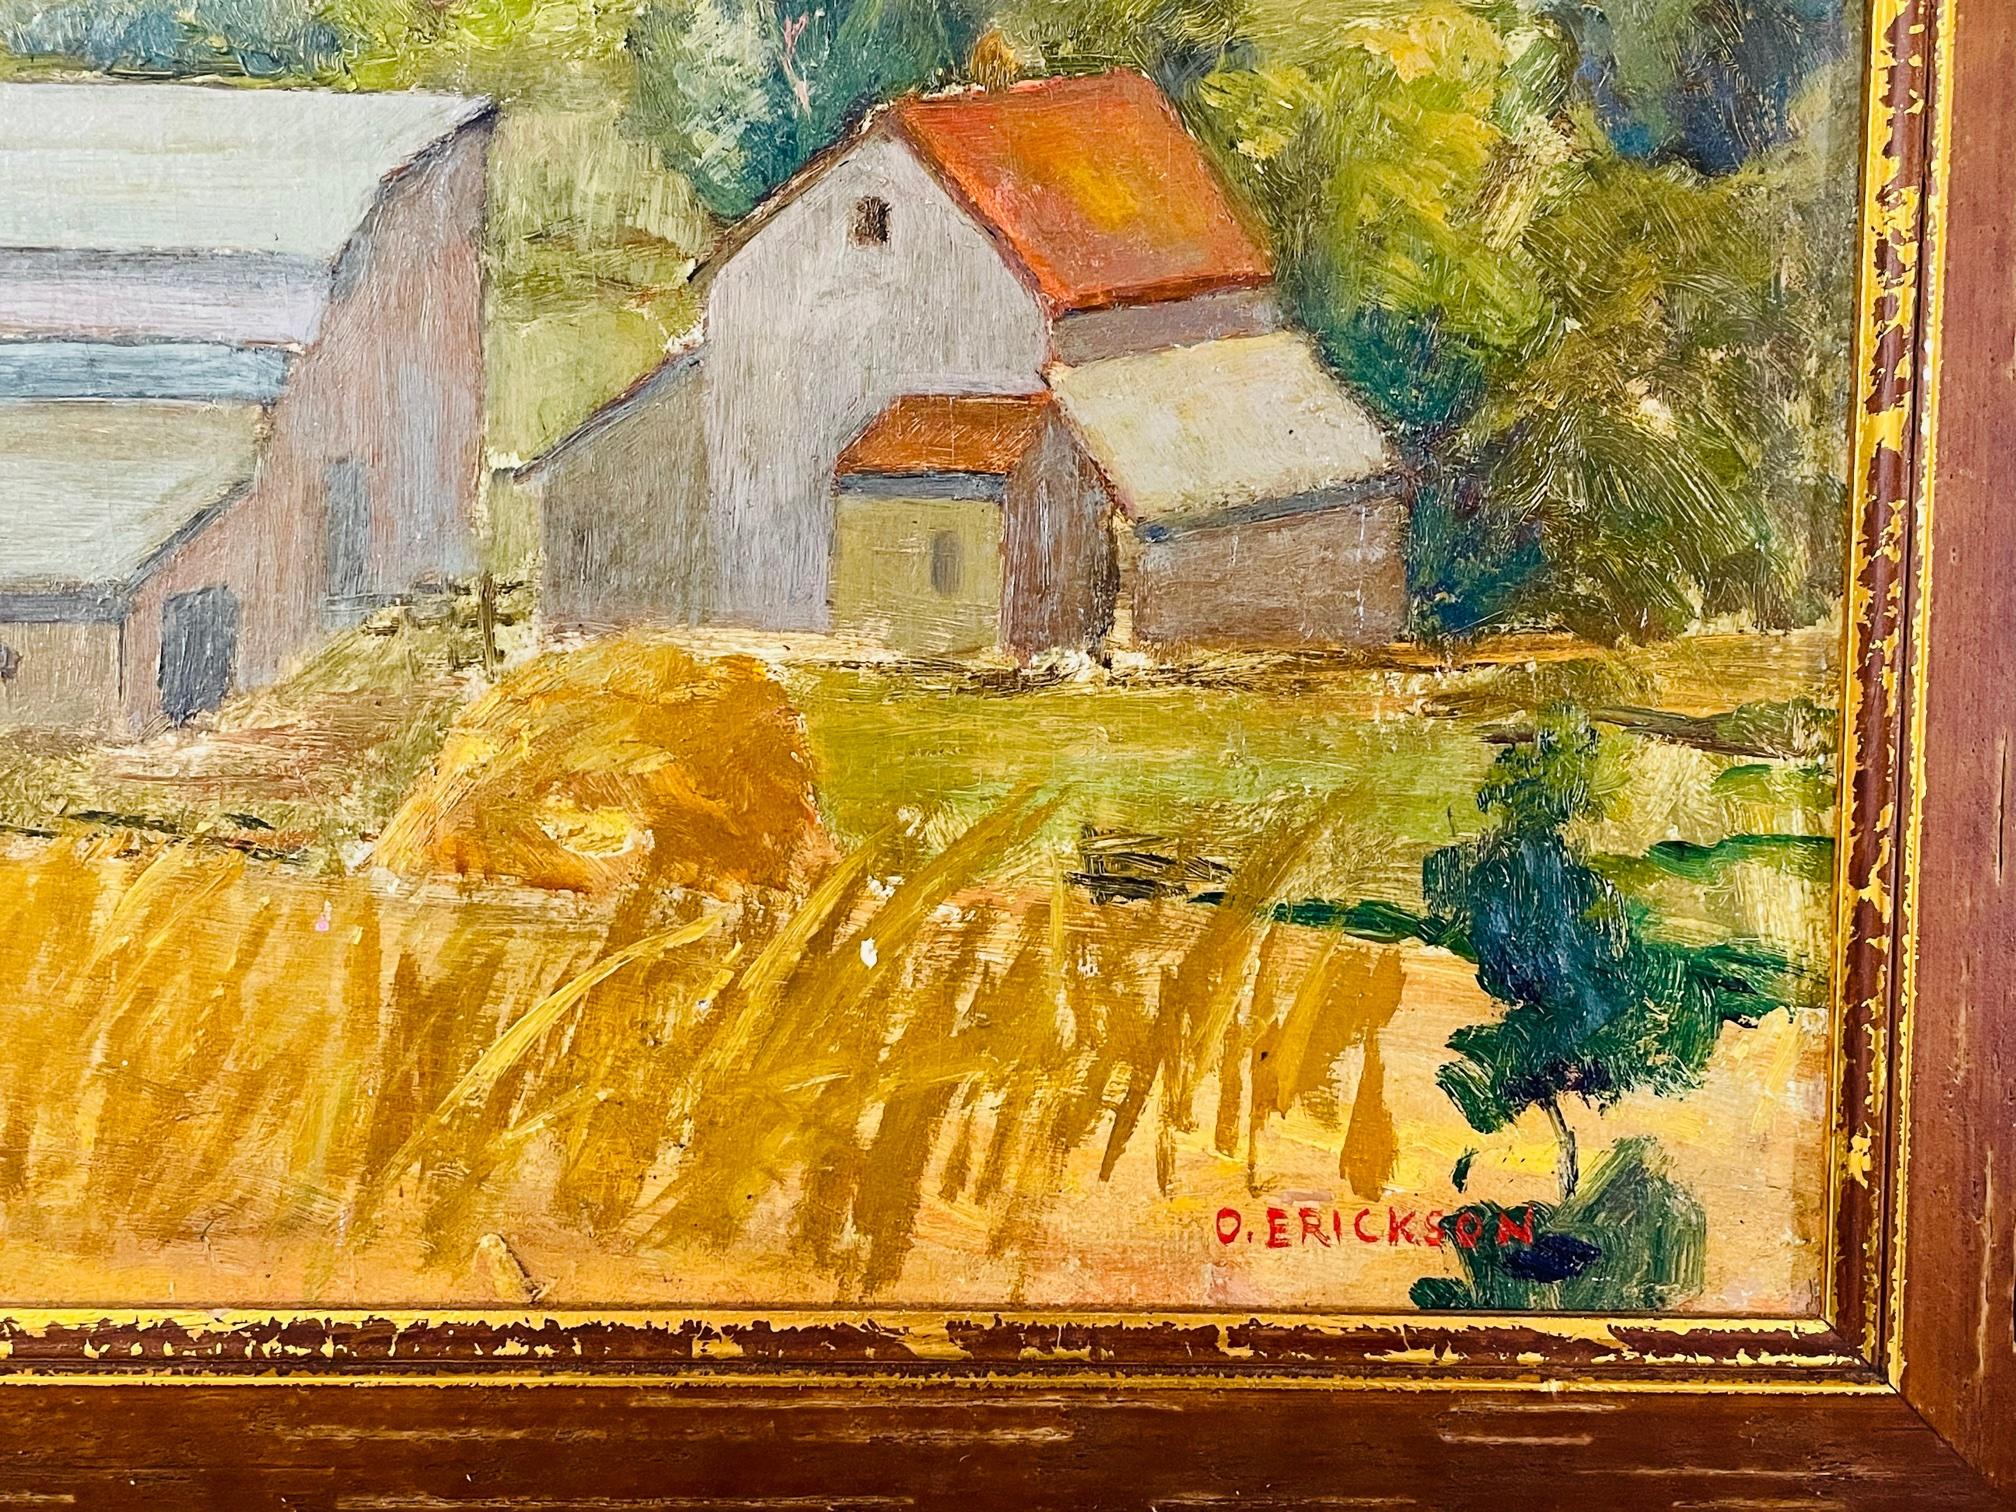 20th Century Landscape Oil on Board Painting Signed O.Erickson